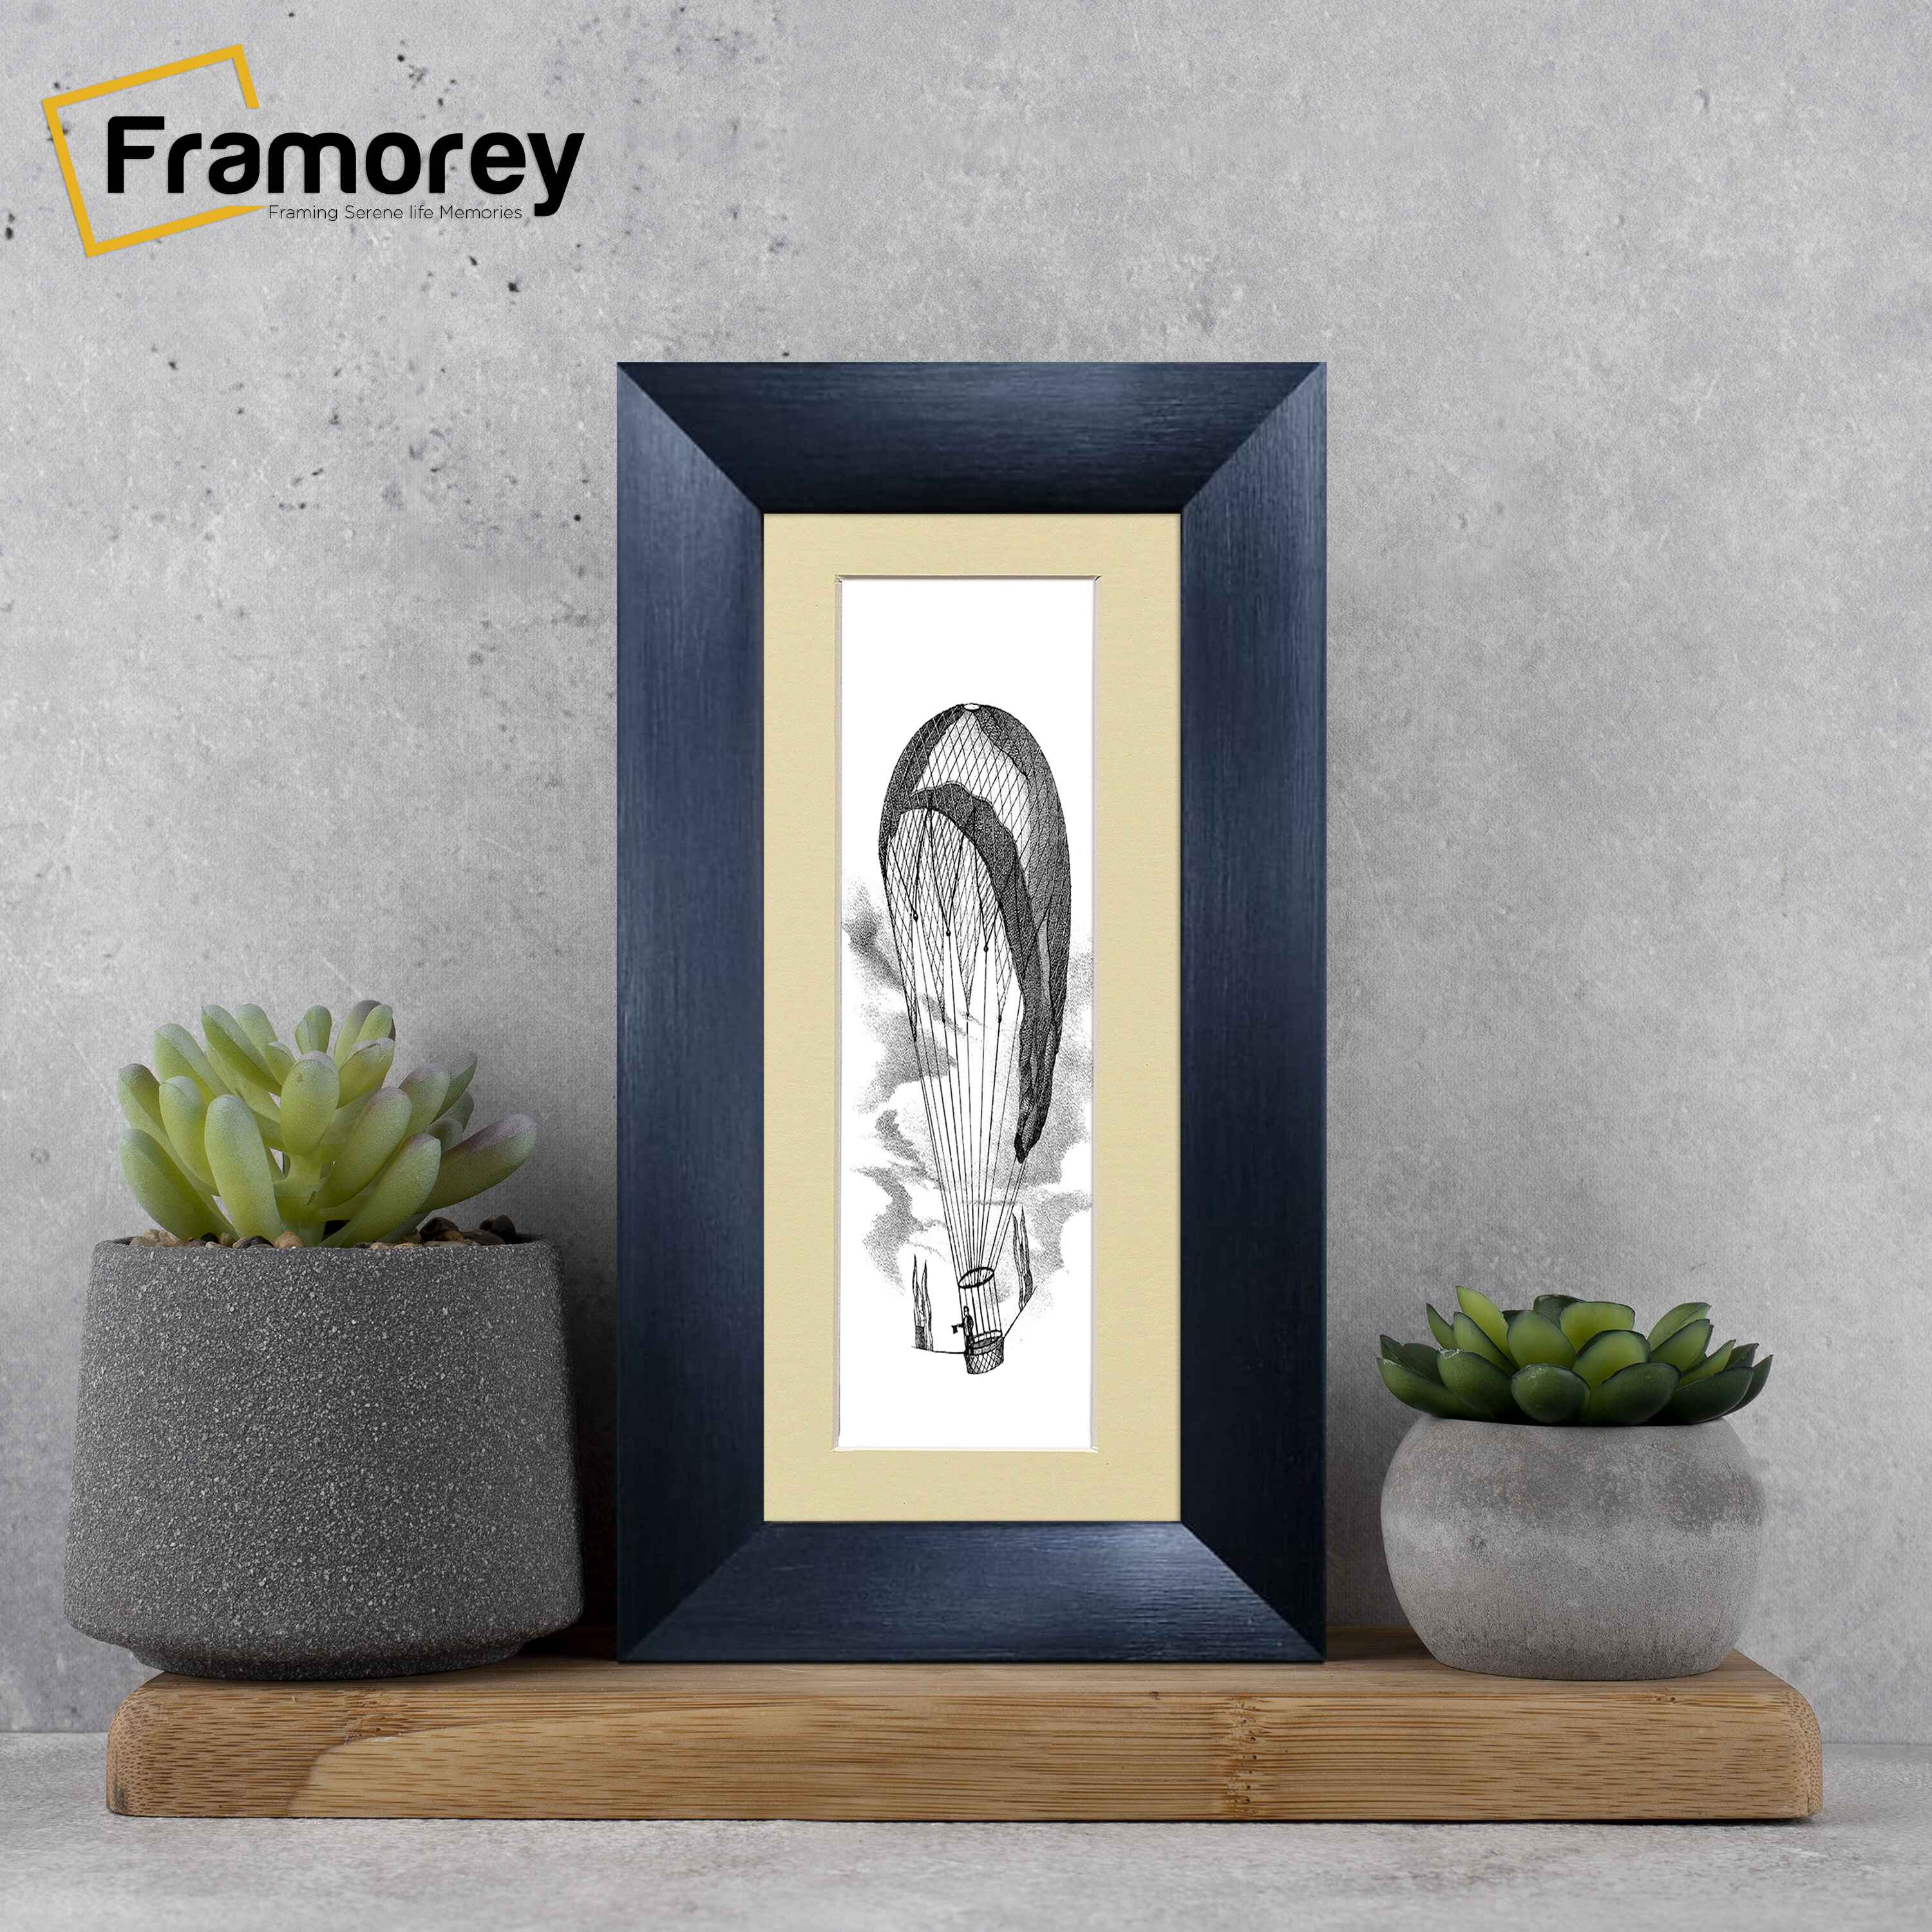 Panoramic Size Brushed Black Engraved Frames Handmade Poster Frames With Ivory Mount